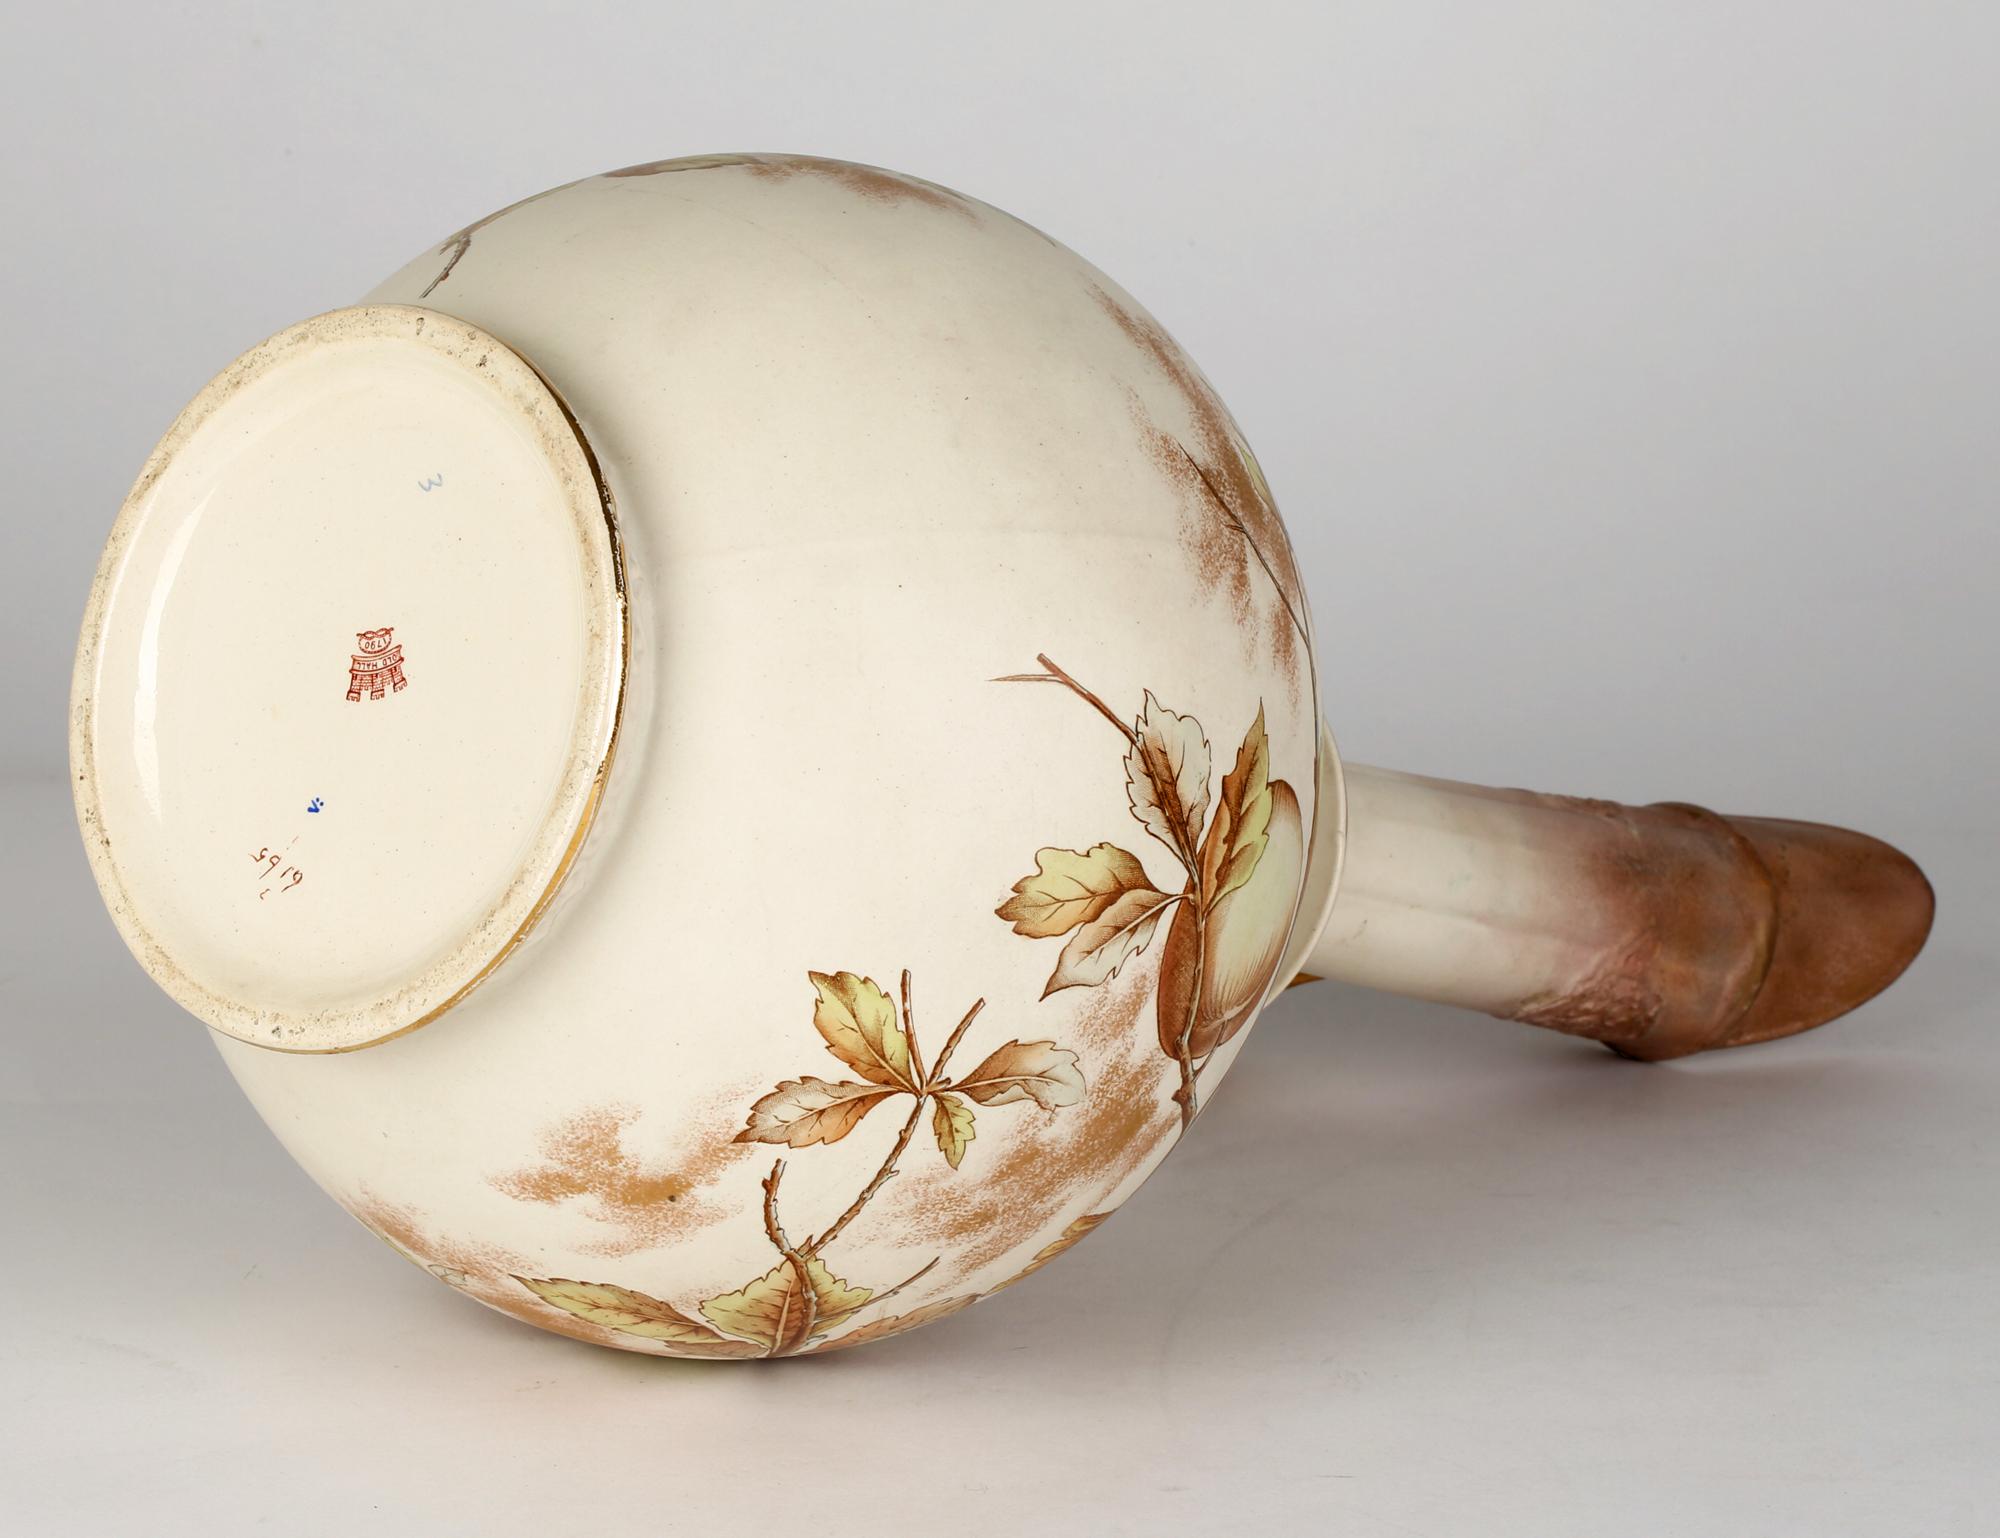 A large and rare Old Hall Aesthetic Movement ewer hand painted with a blue tit perched on a crab apple tree designed by Christopher Dresser (British, 1834-1904) and dating from around 1885. This impressive earthenware ewer is made in the Japonesque